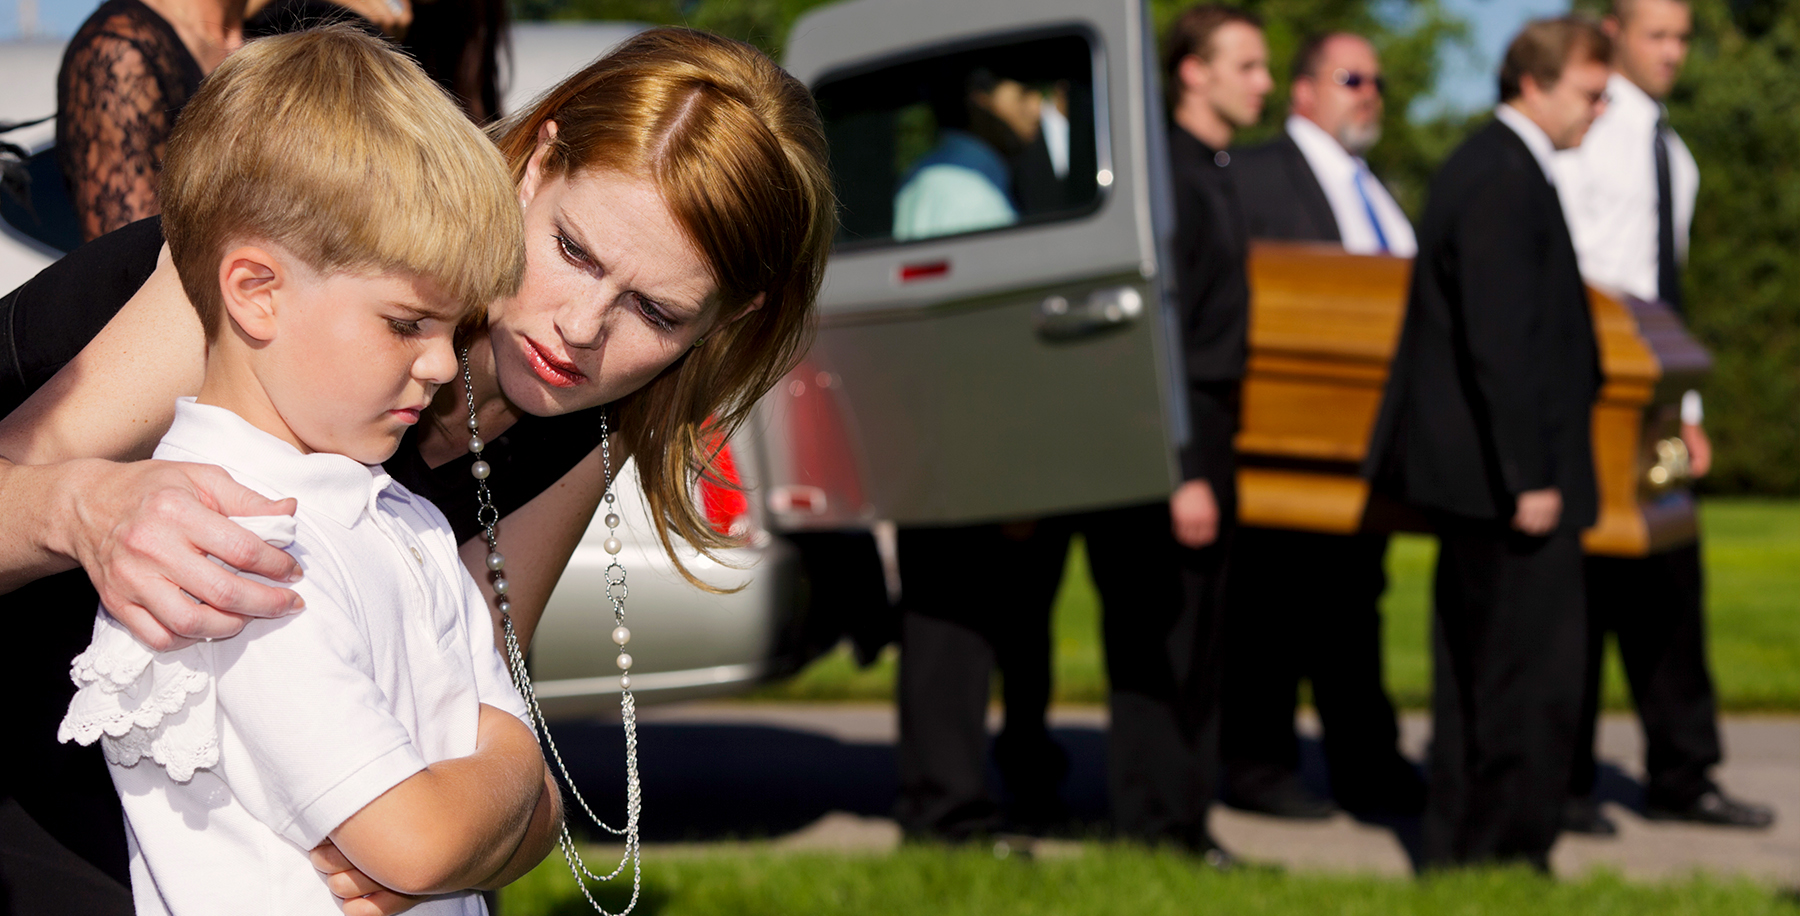 Wrongful Death Claims and the Role of Insurance